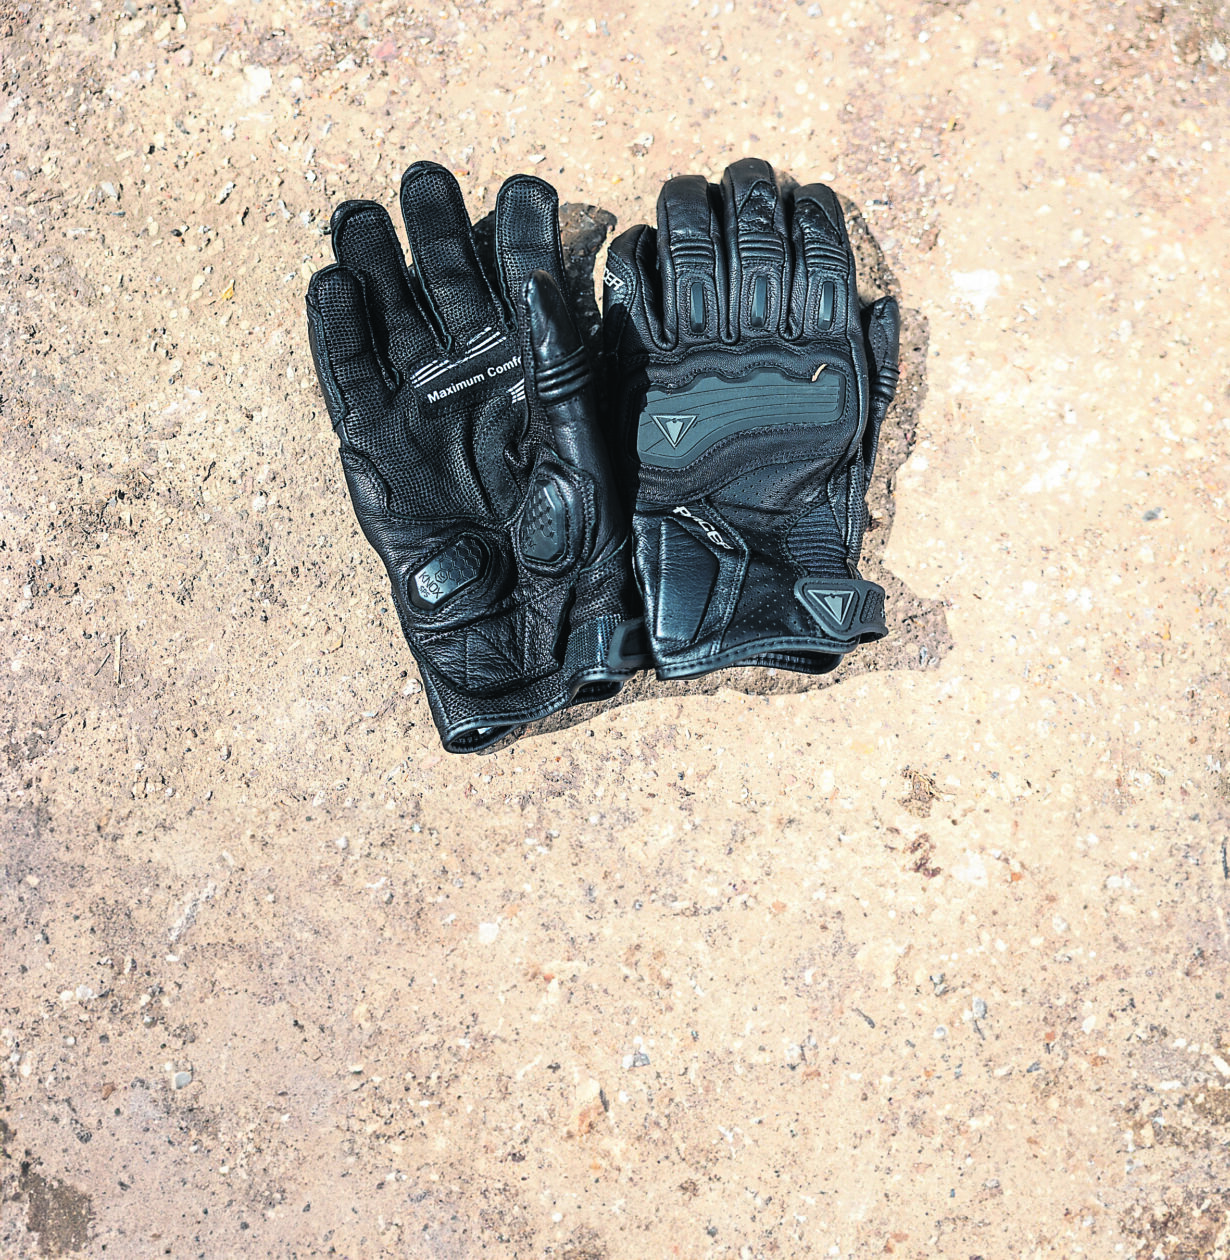 Summer Motorcycle Gloves Buying Guide